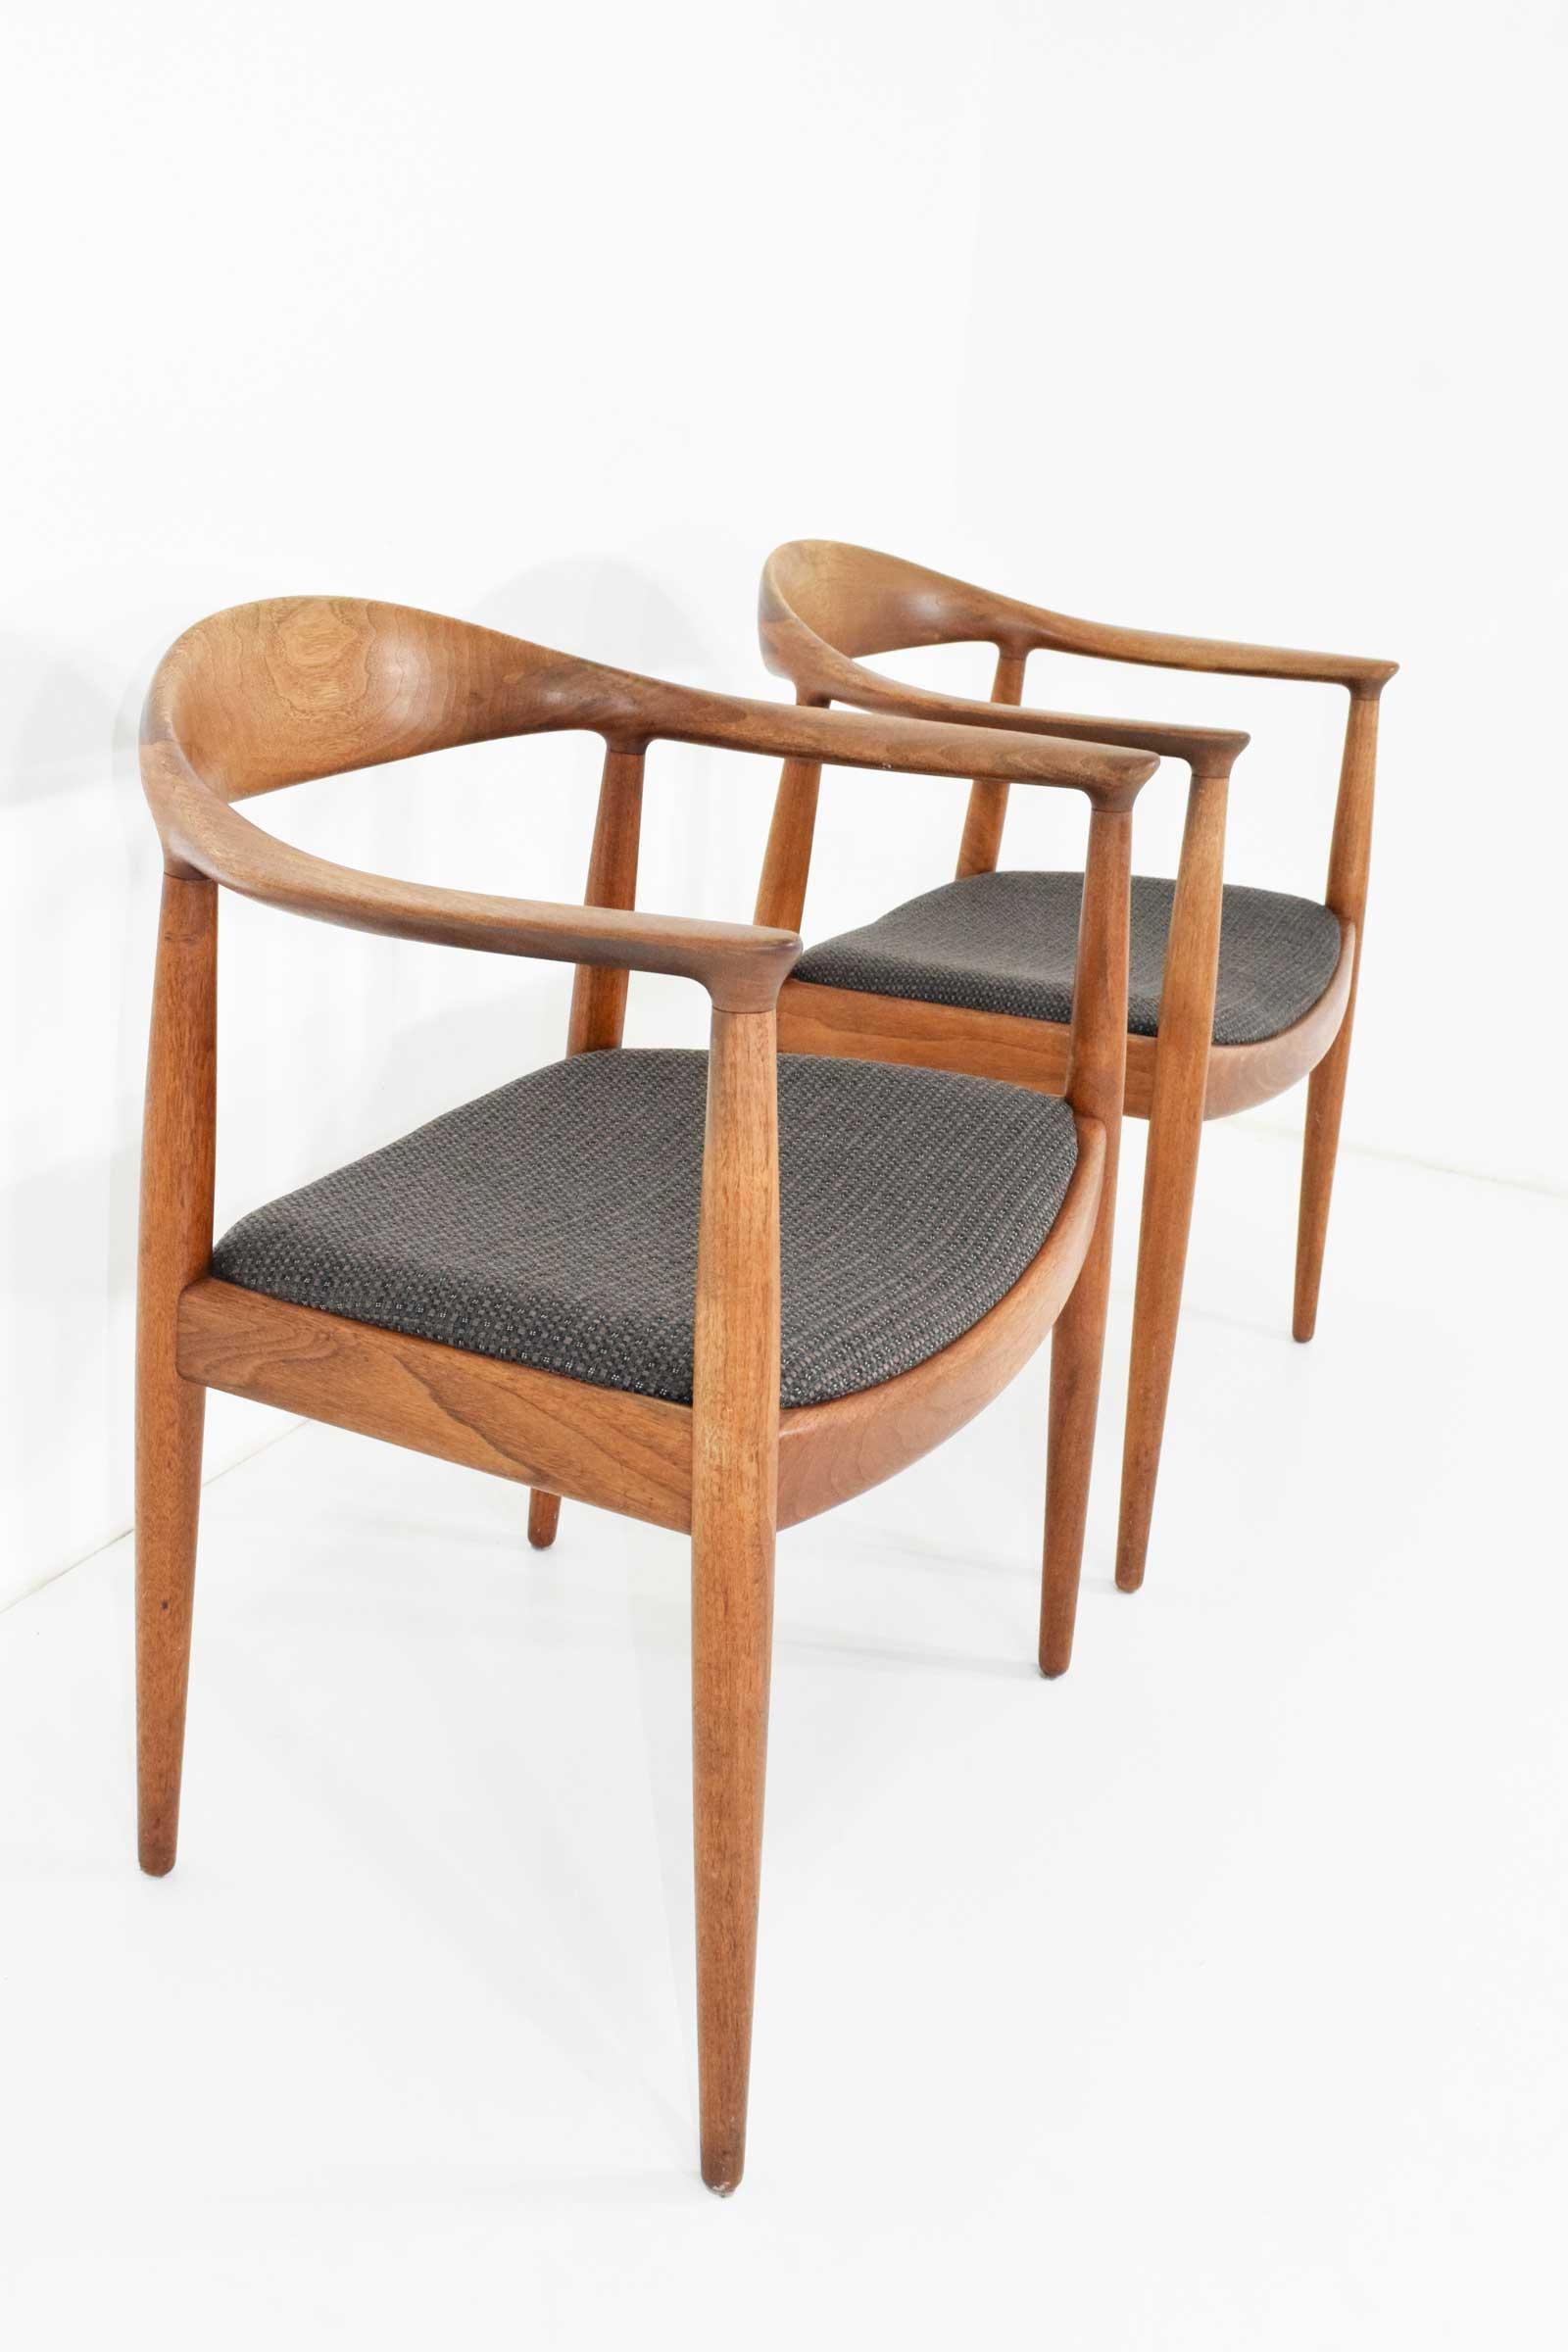 Hans Wegner Round Chairs 8 Available 5